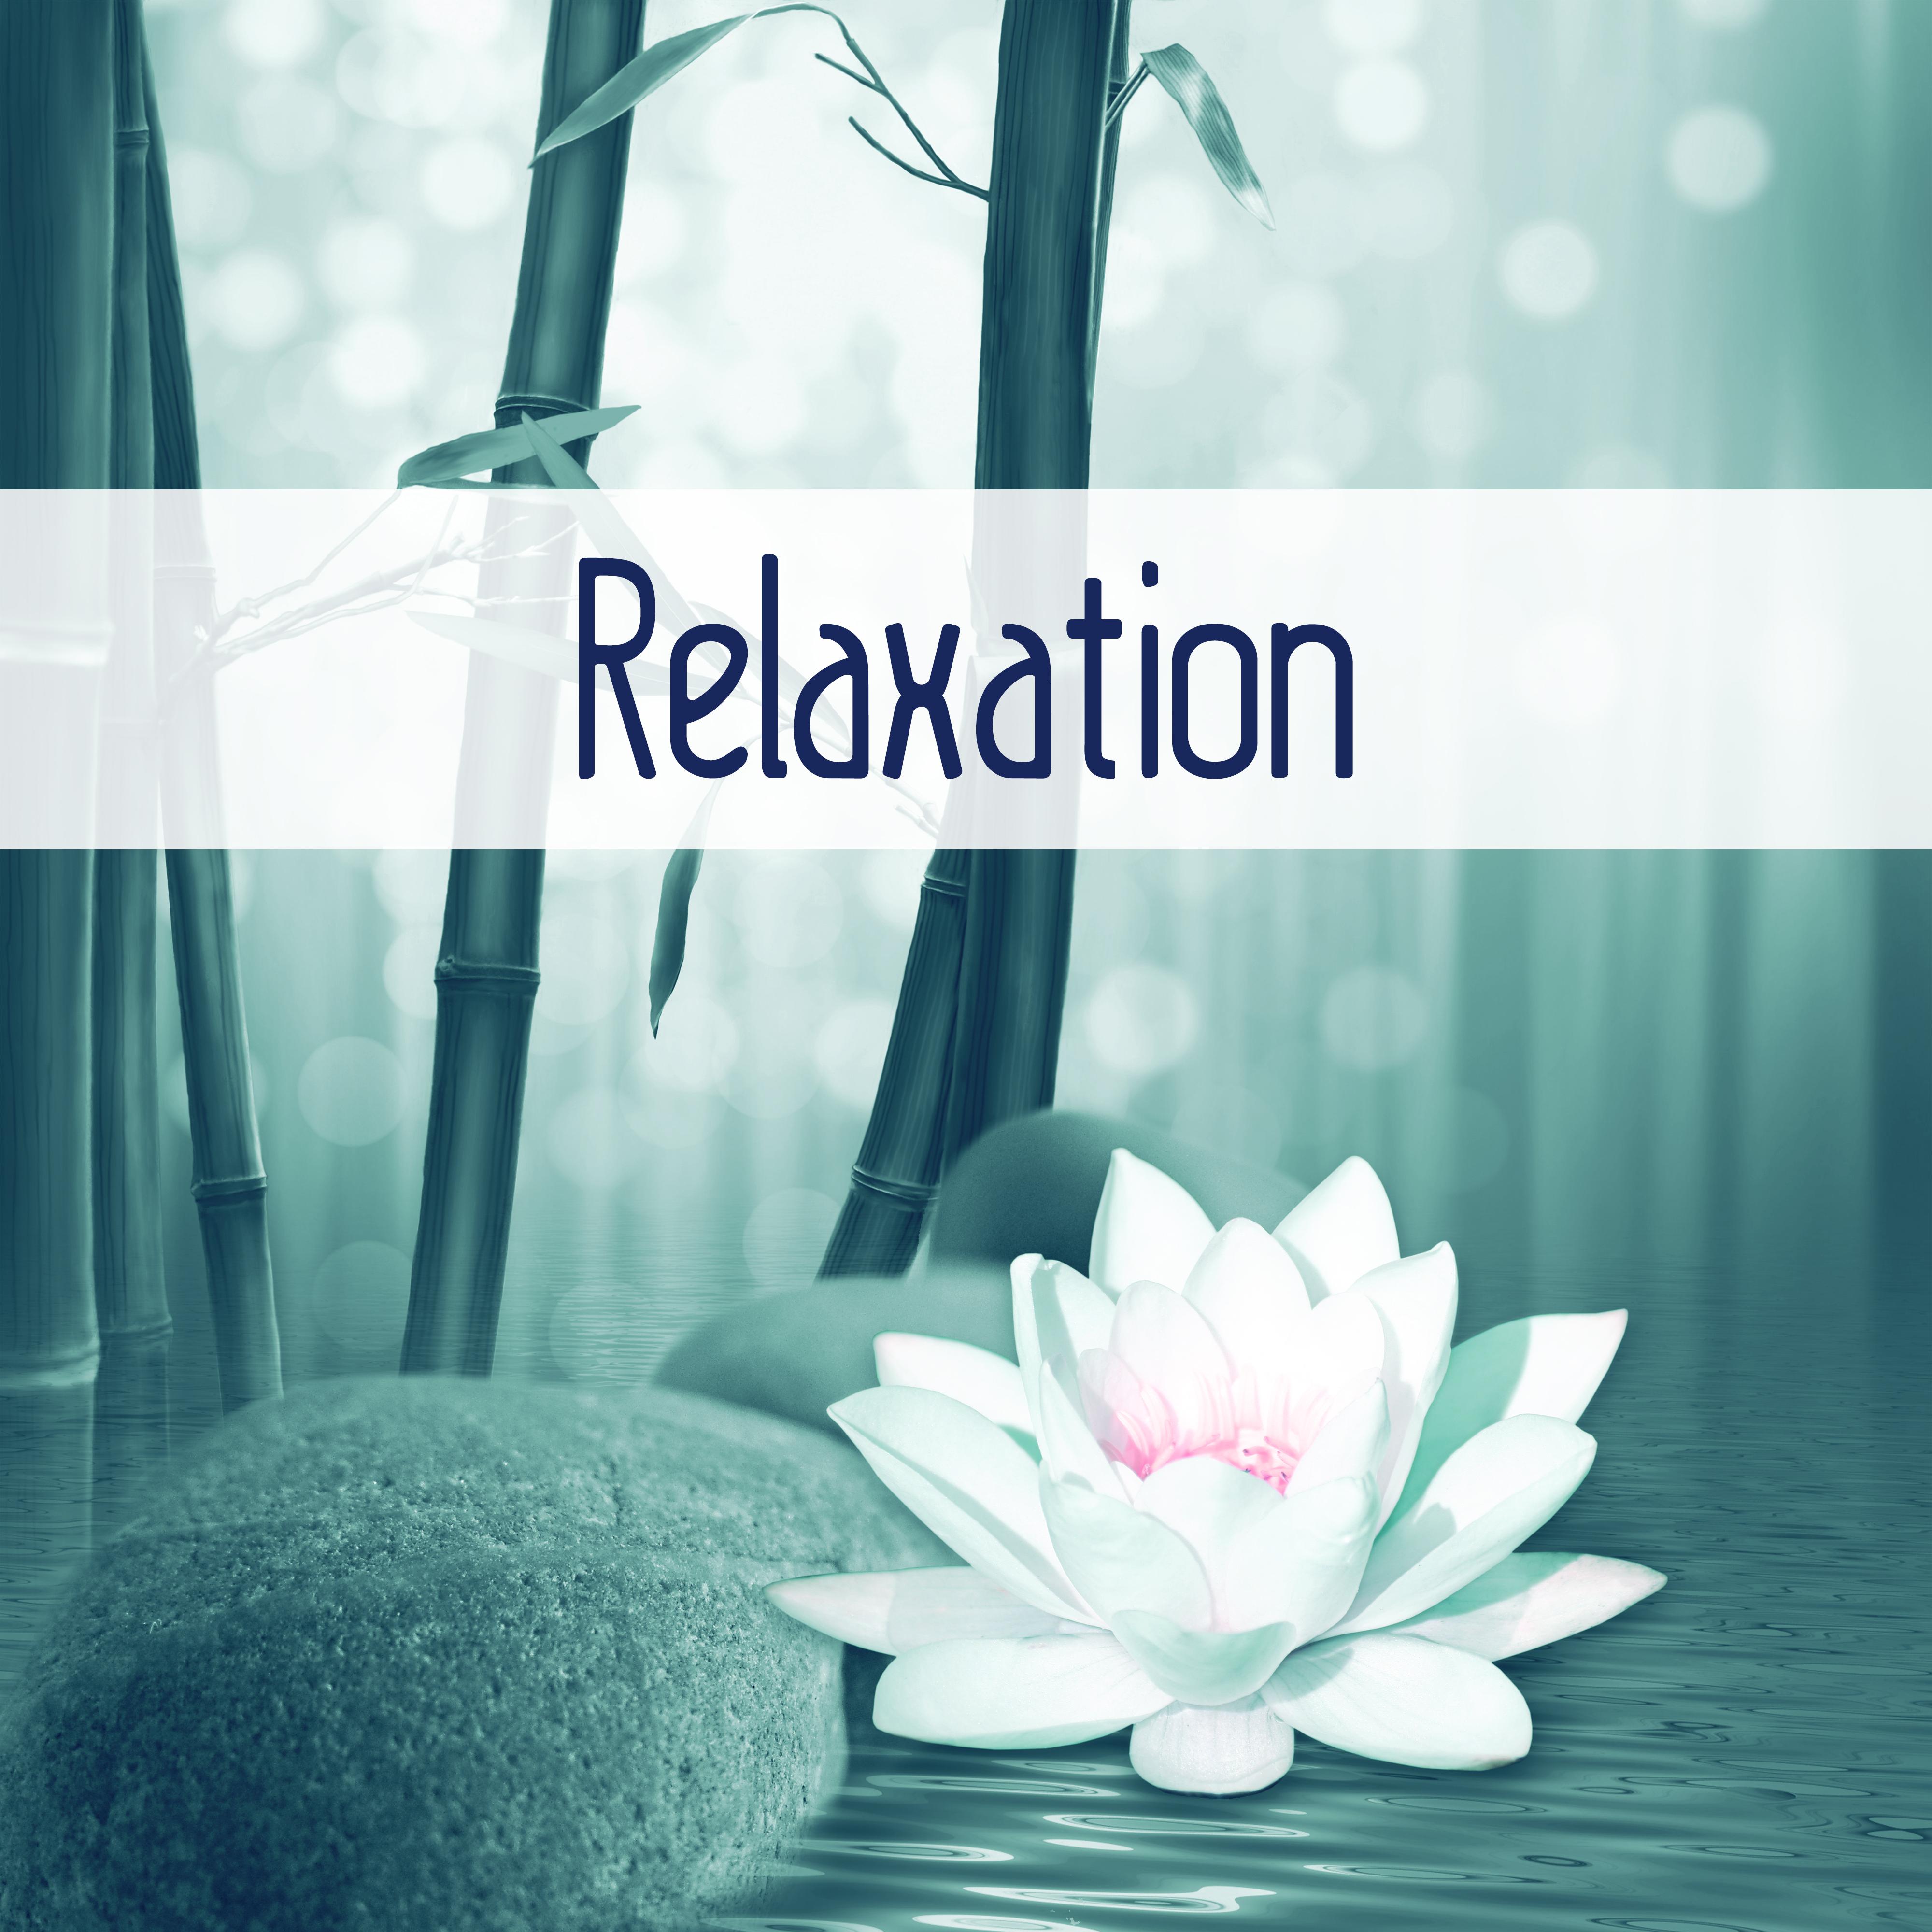 Relaxation – Spa Music, Well Being, Rest, Peaceful Music, Morning Meditation, New Age, Water Sounds